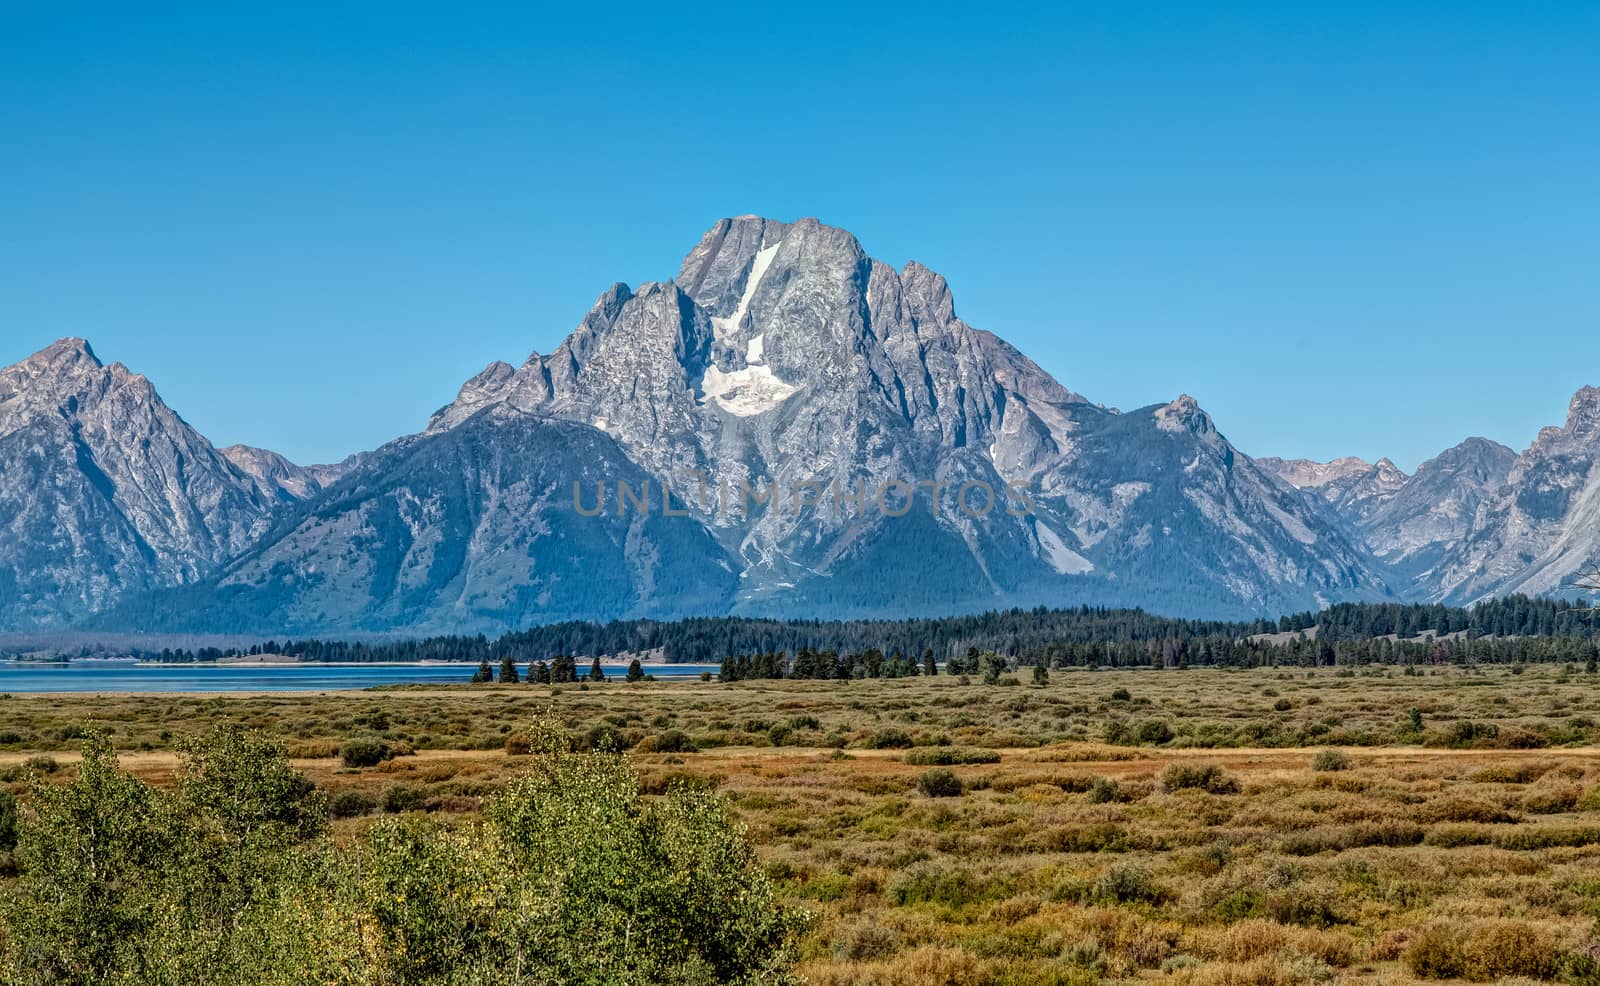 This is an image of Mount Moran, part of the Grand Tetons in Wyoming.